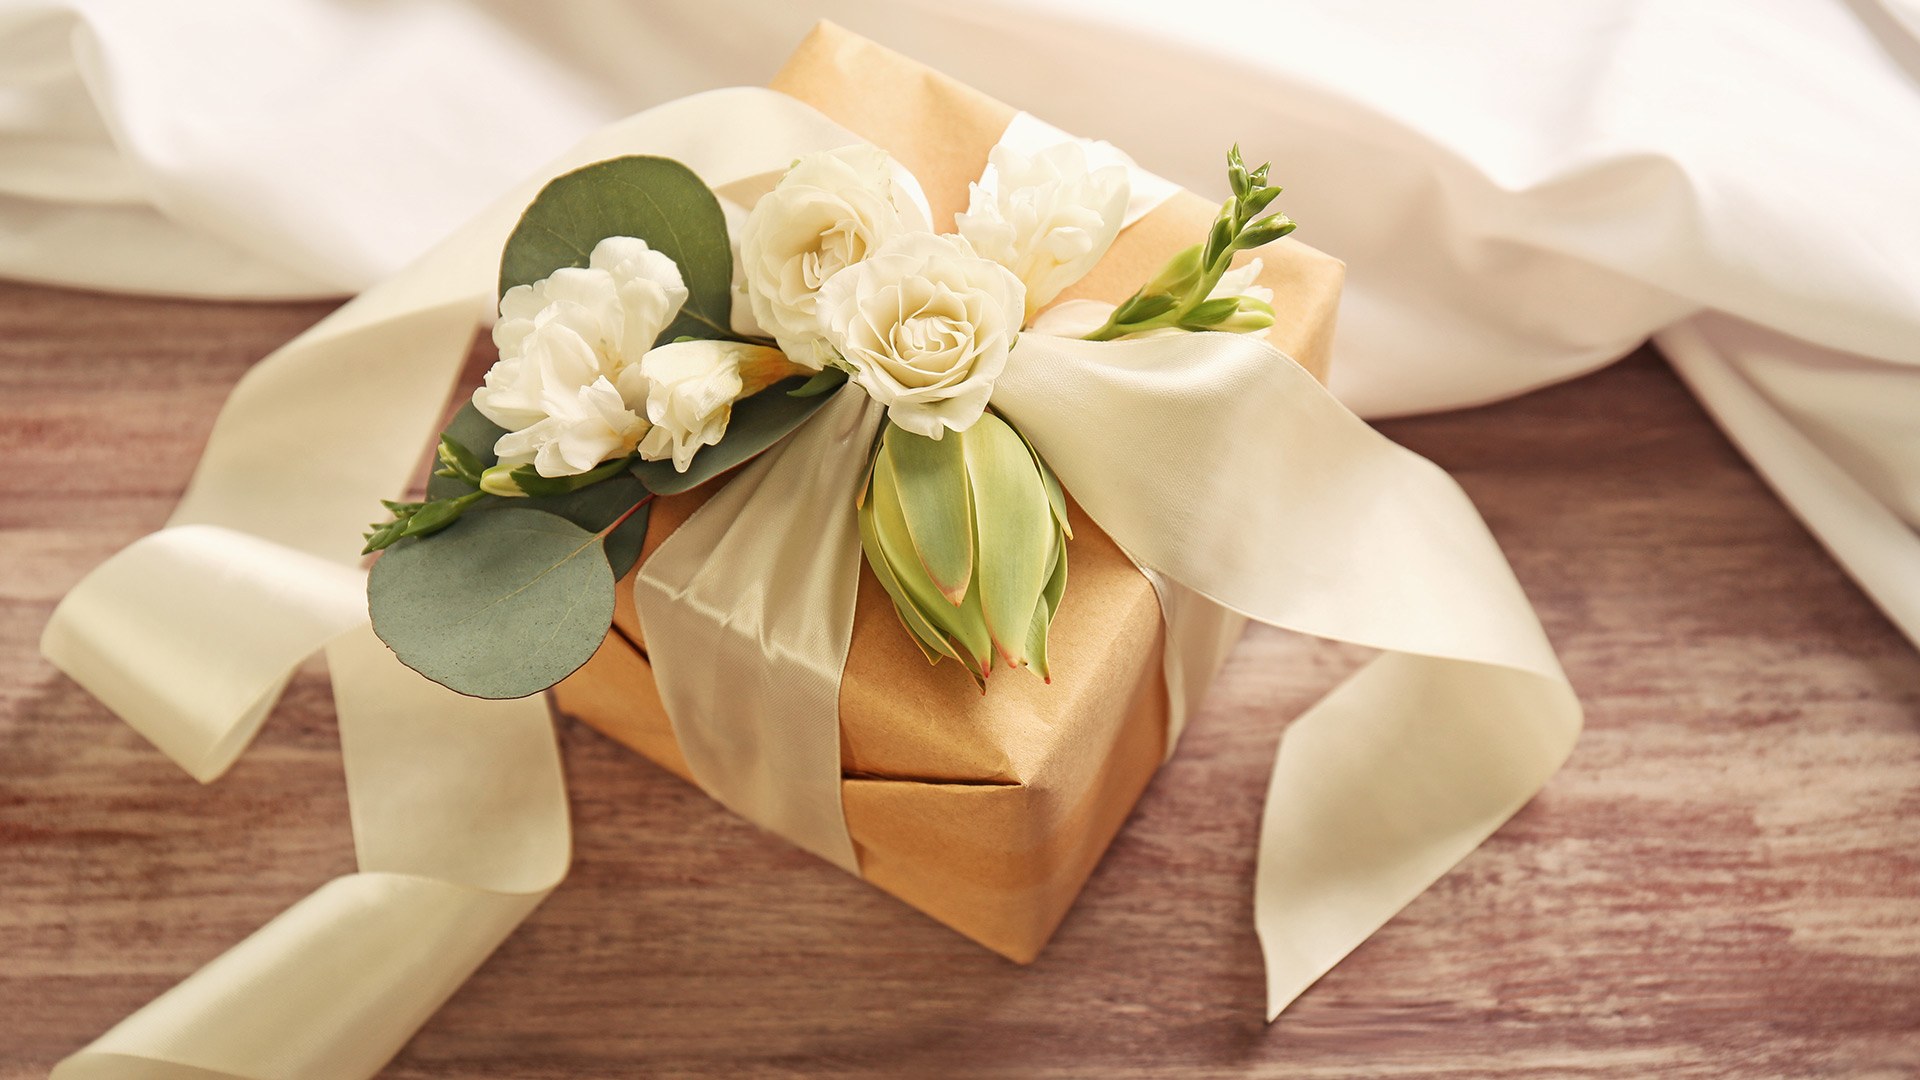 Top 10 Most Luxurious Wedding Gift Ideas for Wealthy ...